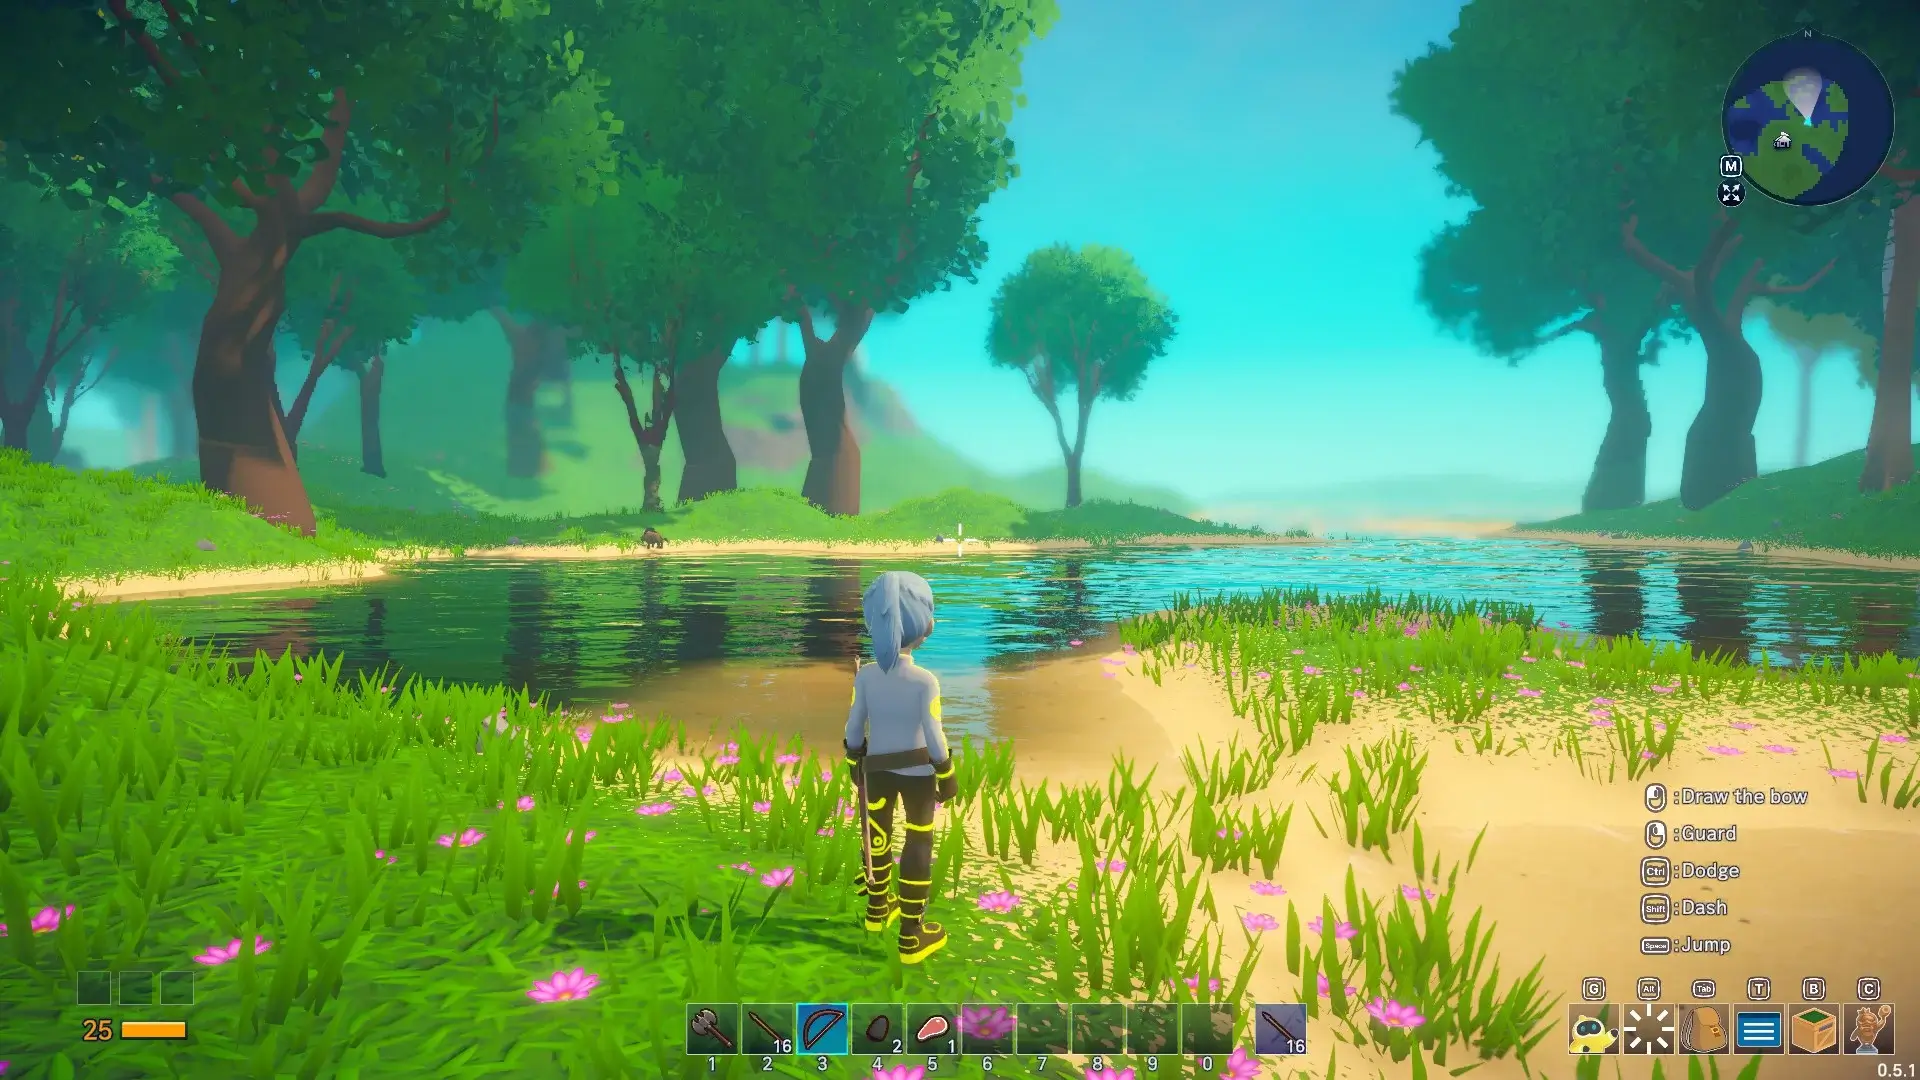 The player character is in the centre of the screen, surrounded by trees and water from the starting area of the game